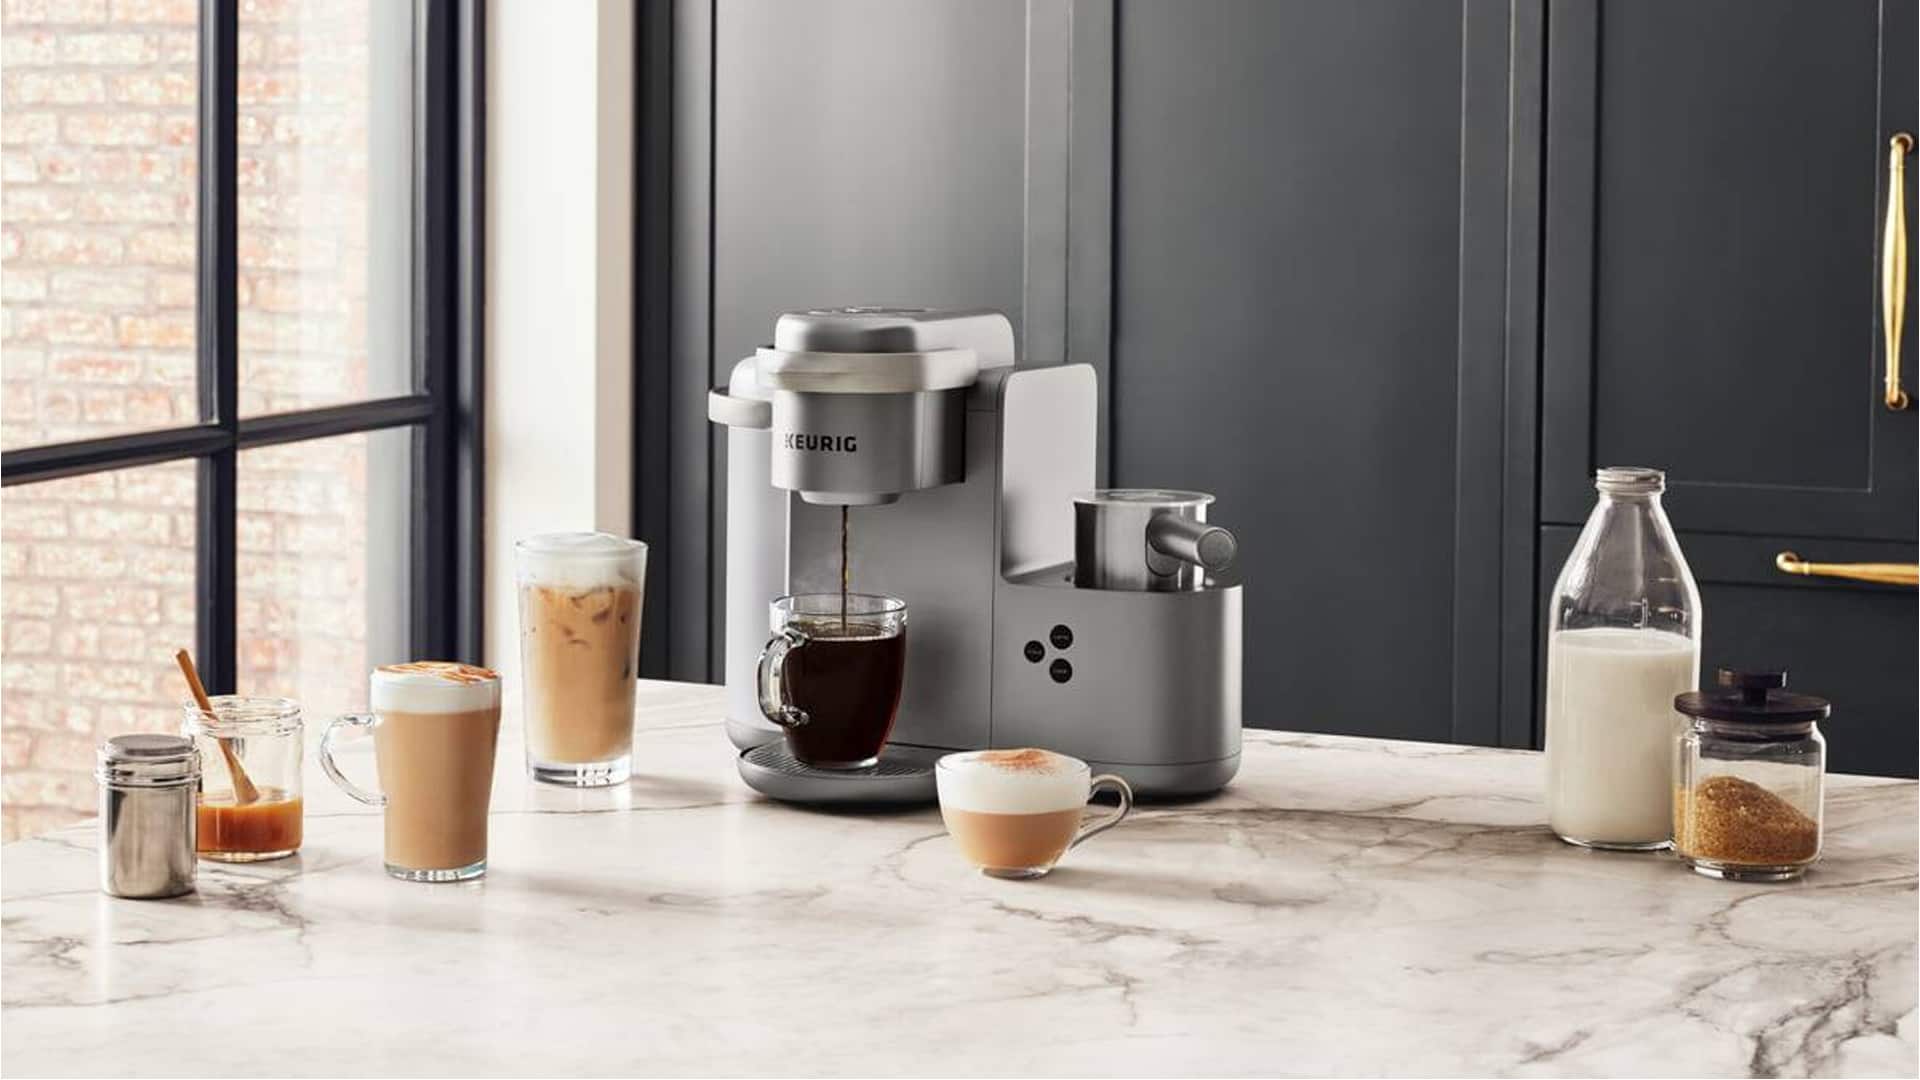 Keurig coffee and espresso maker on a counter top with a variety of coffee types, a good alternative to the breville pro espresso machines